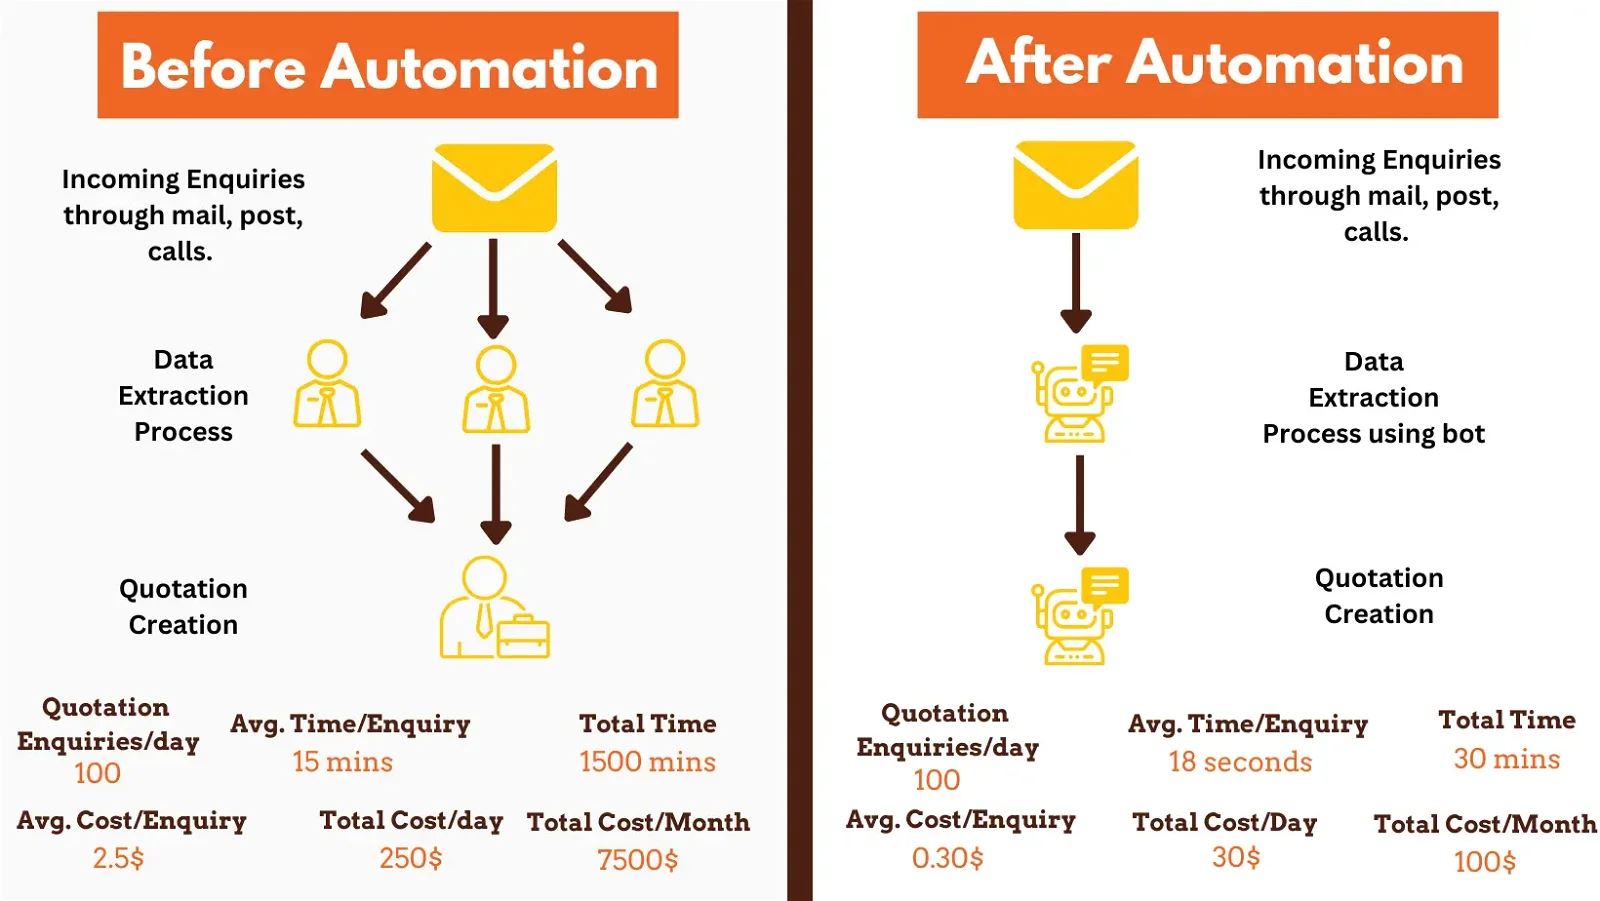 Extract data from email or calls to automate quotation creation process.